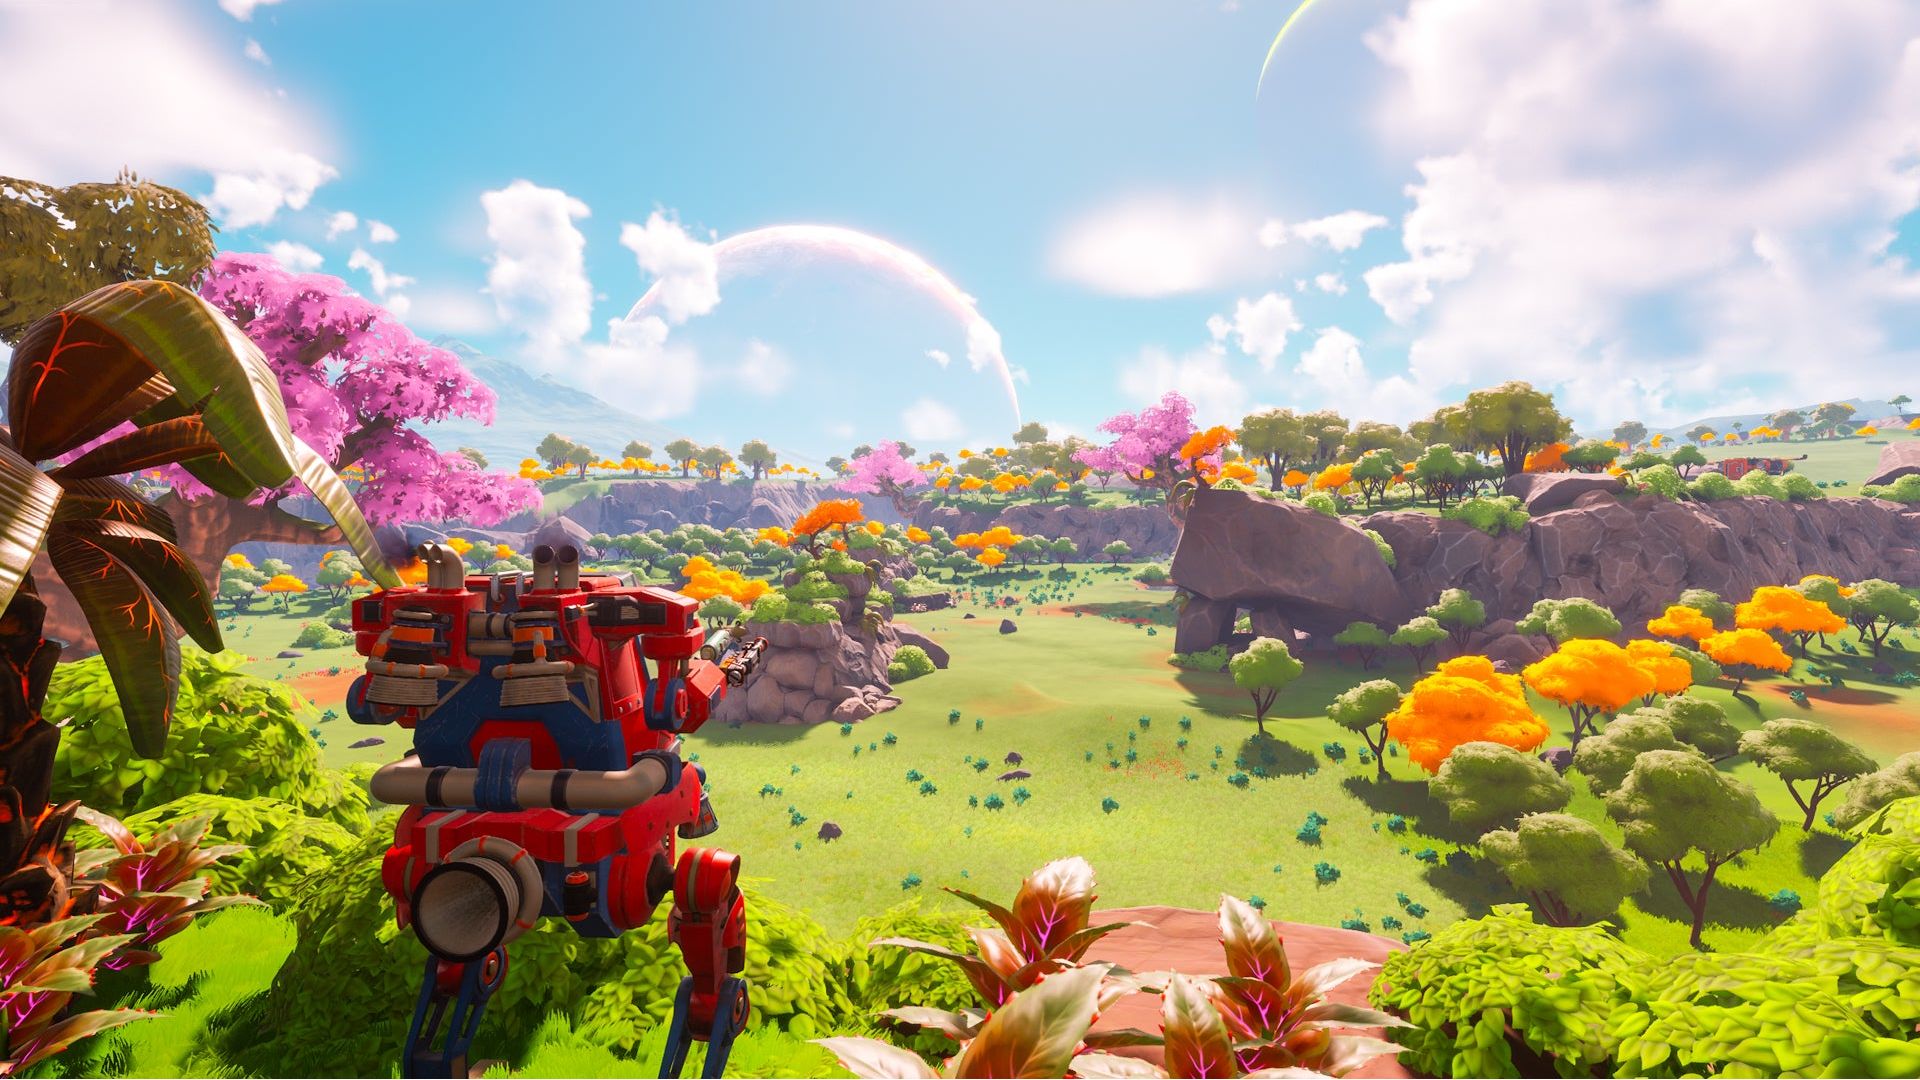 Lightyear Frontier gameplay: A mech can be seen overlooking the map